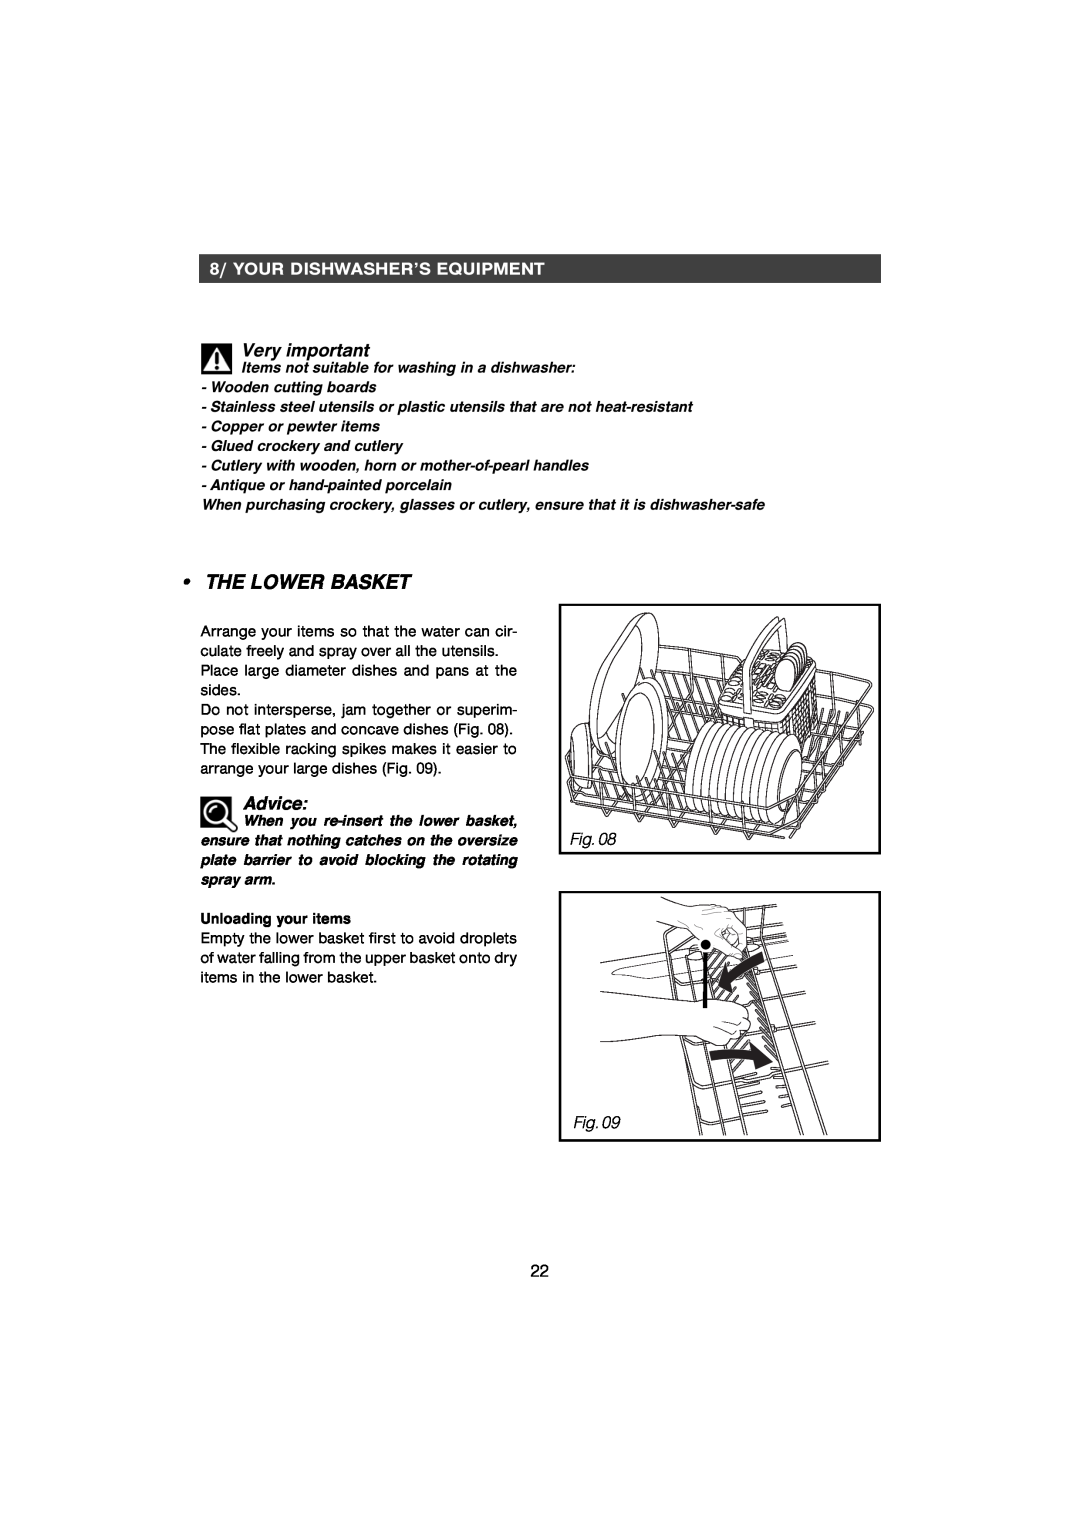 CDA WF250SS manual The Lower Basket, Very important, Advice, 8/ YOUR DISHWASHER’S EQUIPMENT 